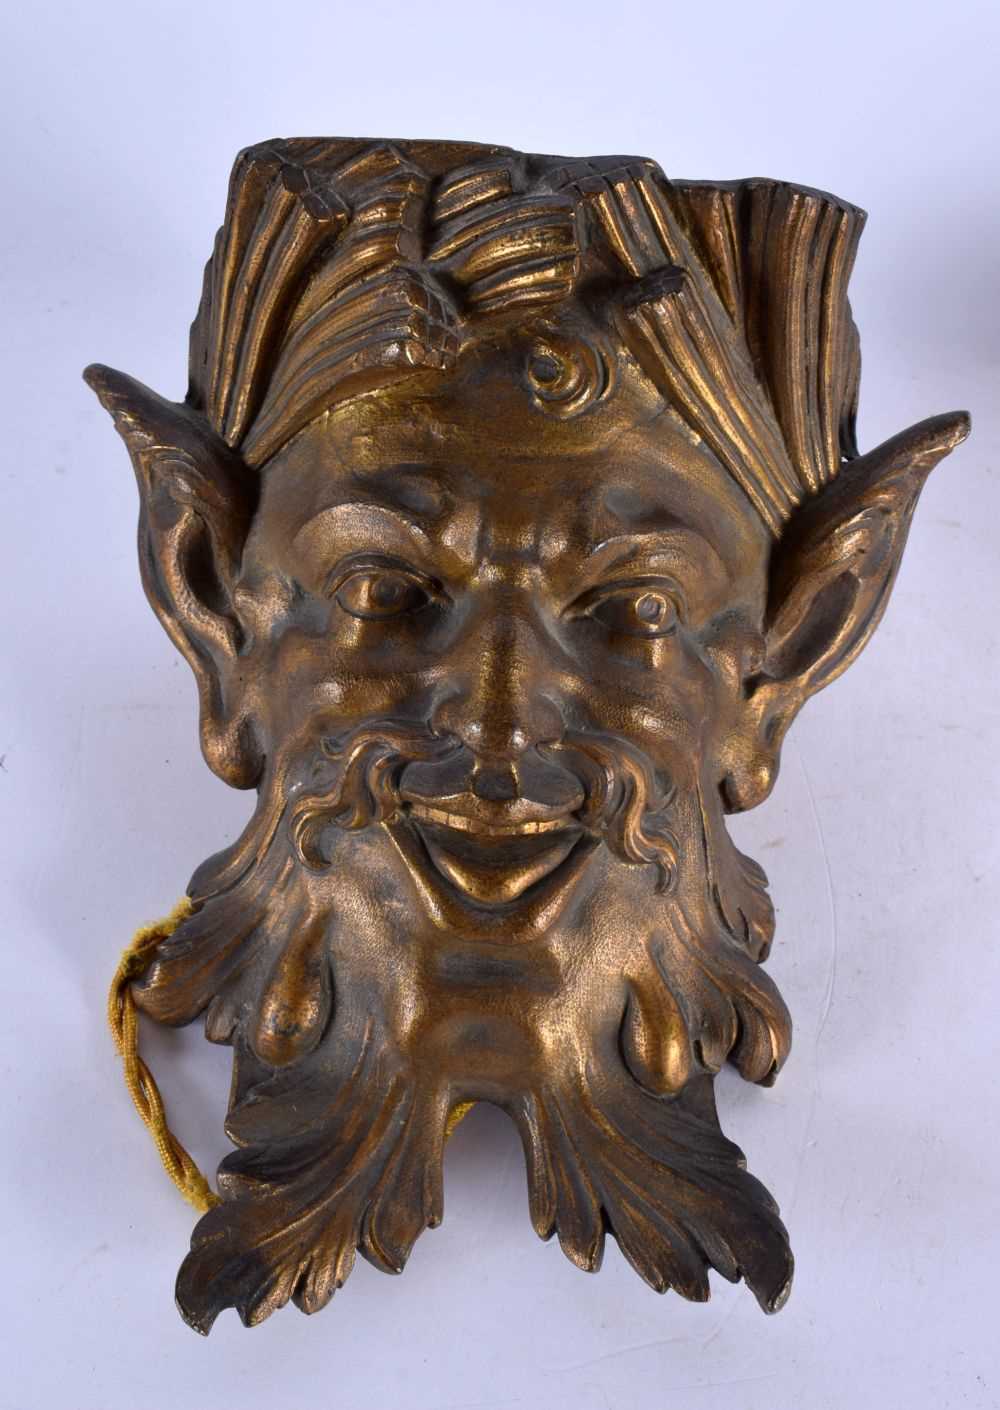 A FINE PAIR OF EARLY 19TH CENTURY FRENCH GILT BRONZE WALL LIGHTS formed as bearded mask head - Image 2 of 6